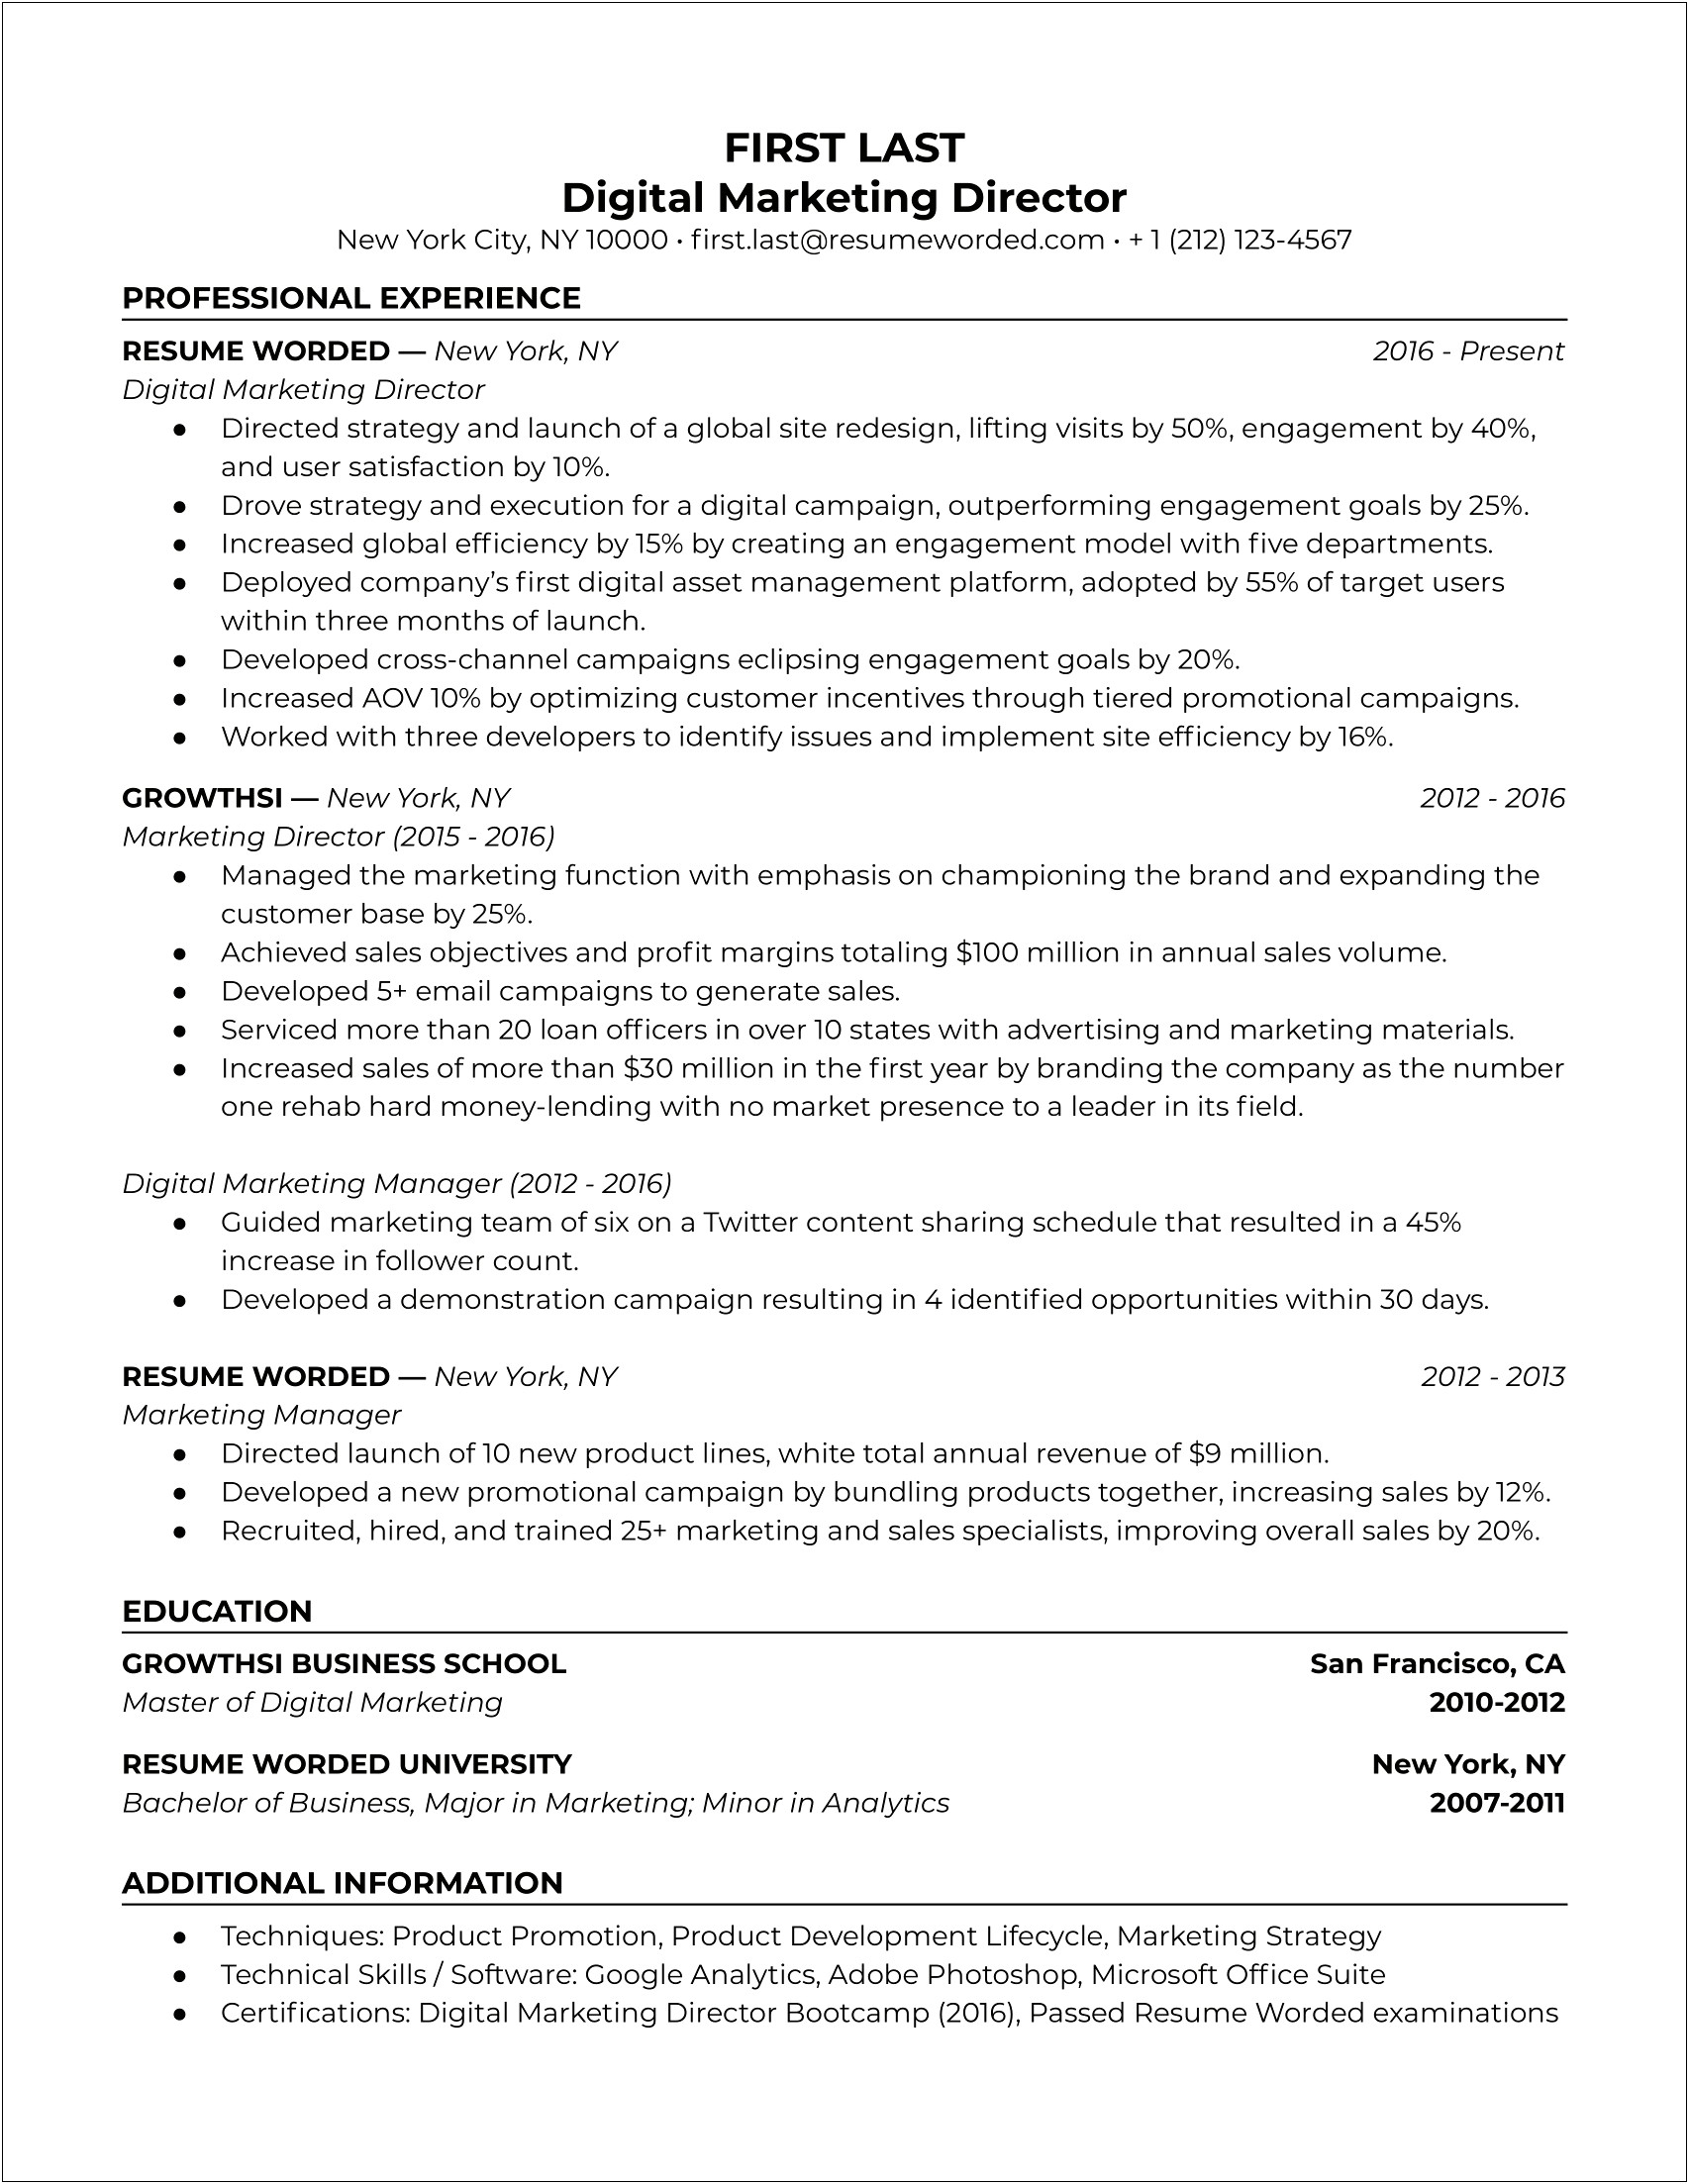 Digital Marketing Resume With No Experience